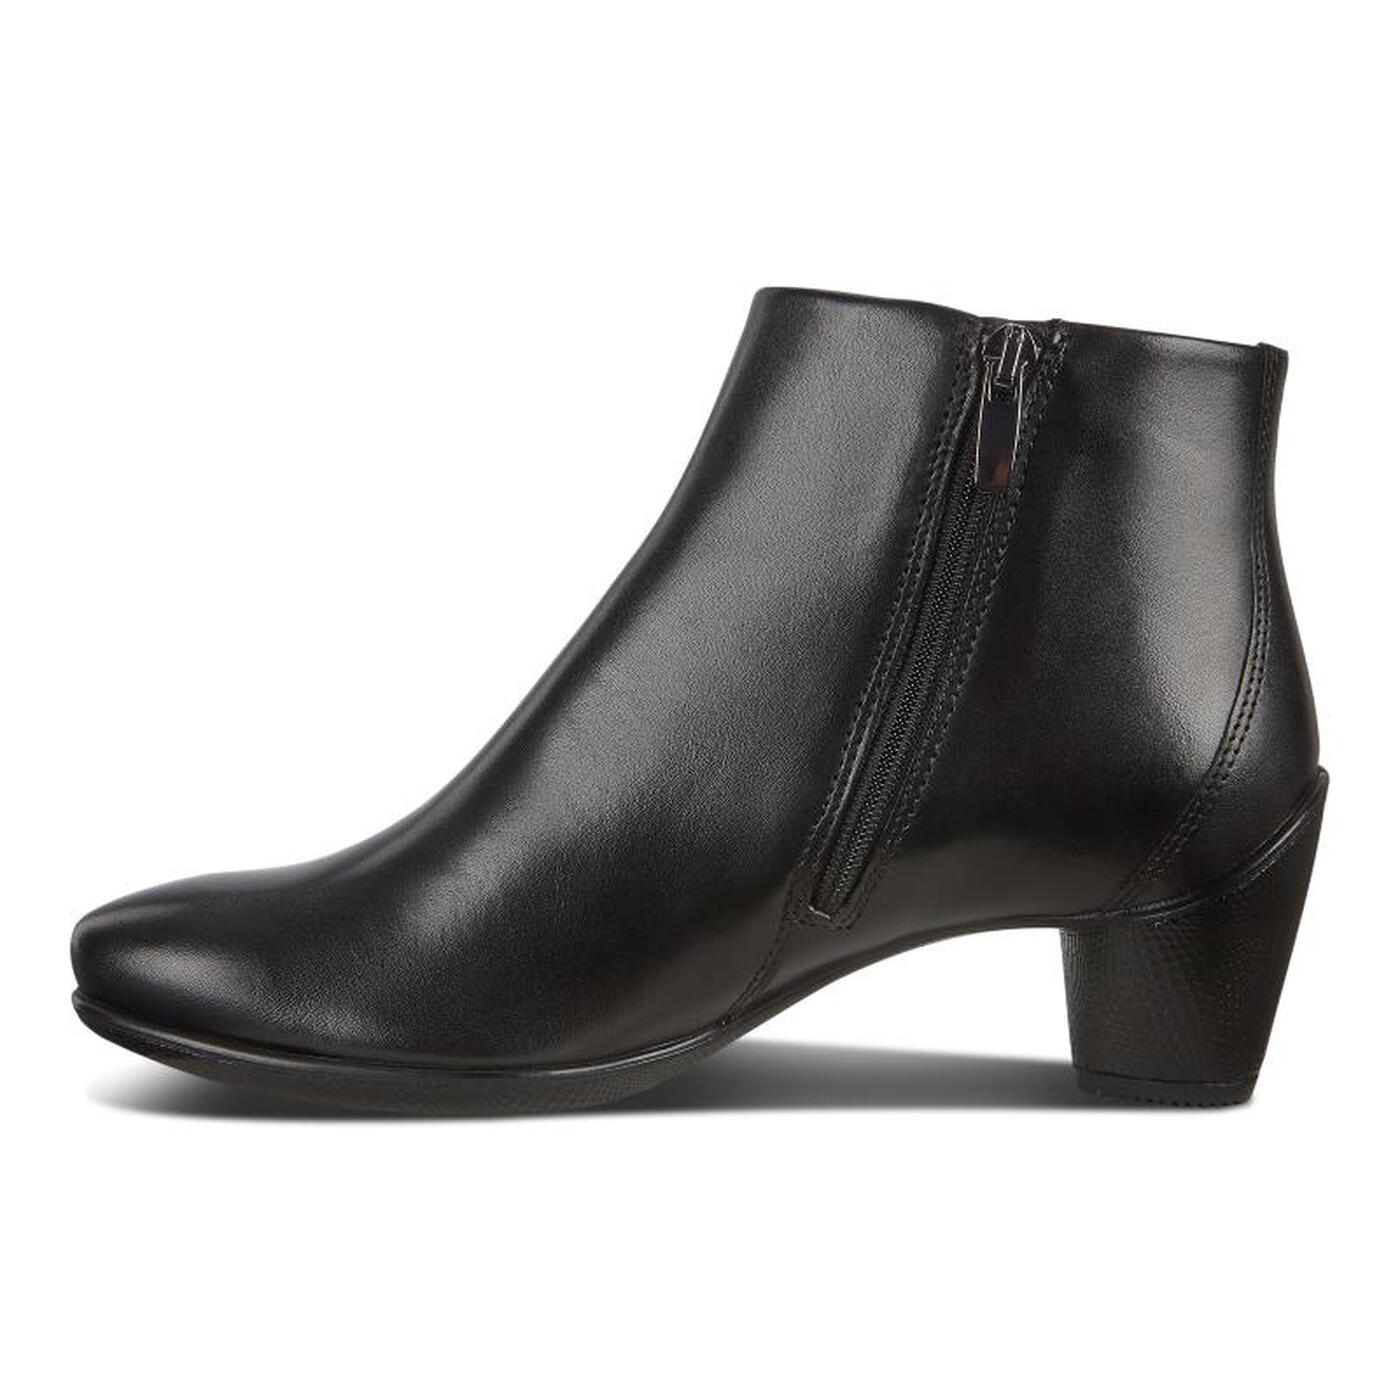 Women's Sculptured 45mm Ankle Boots | ECCO® Shoes